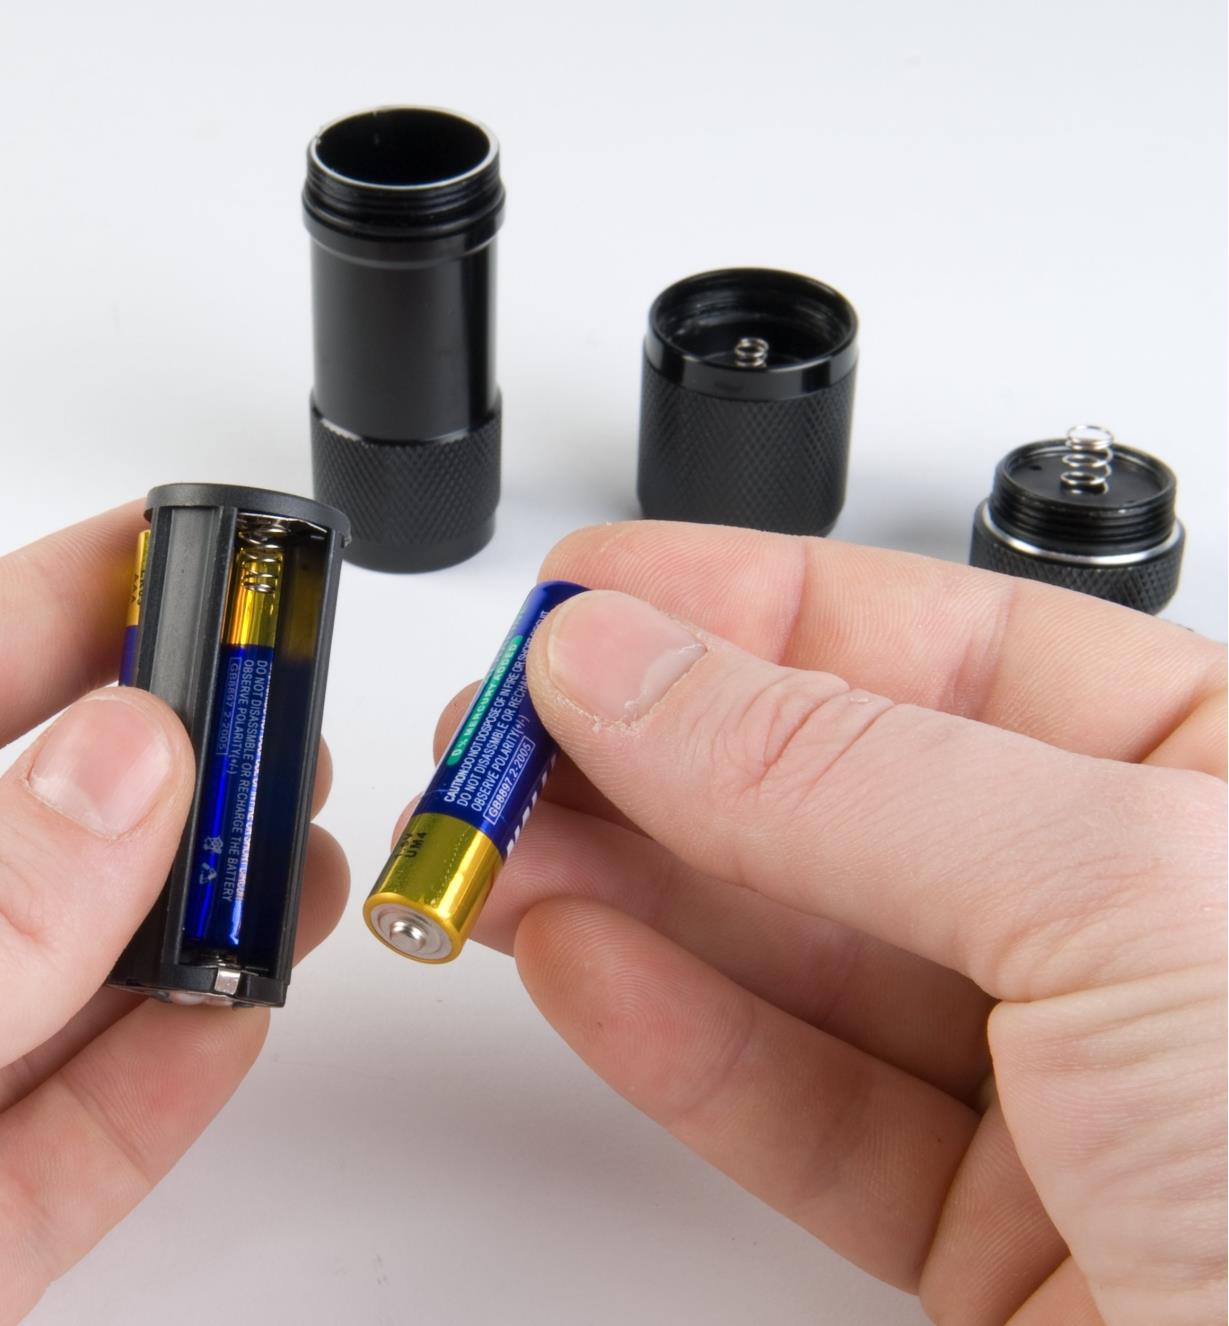 9-LED Flashlight with battery compartment removed to show three AAA batteries